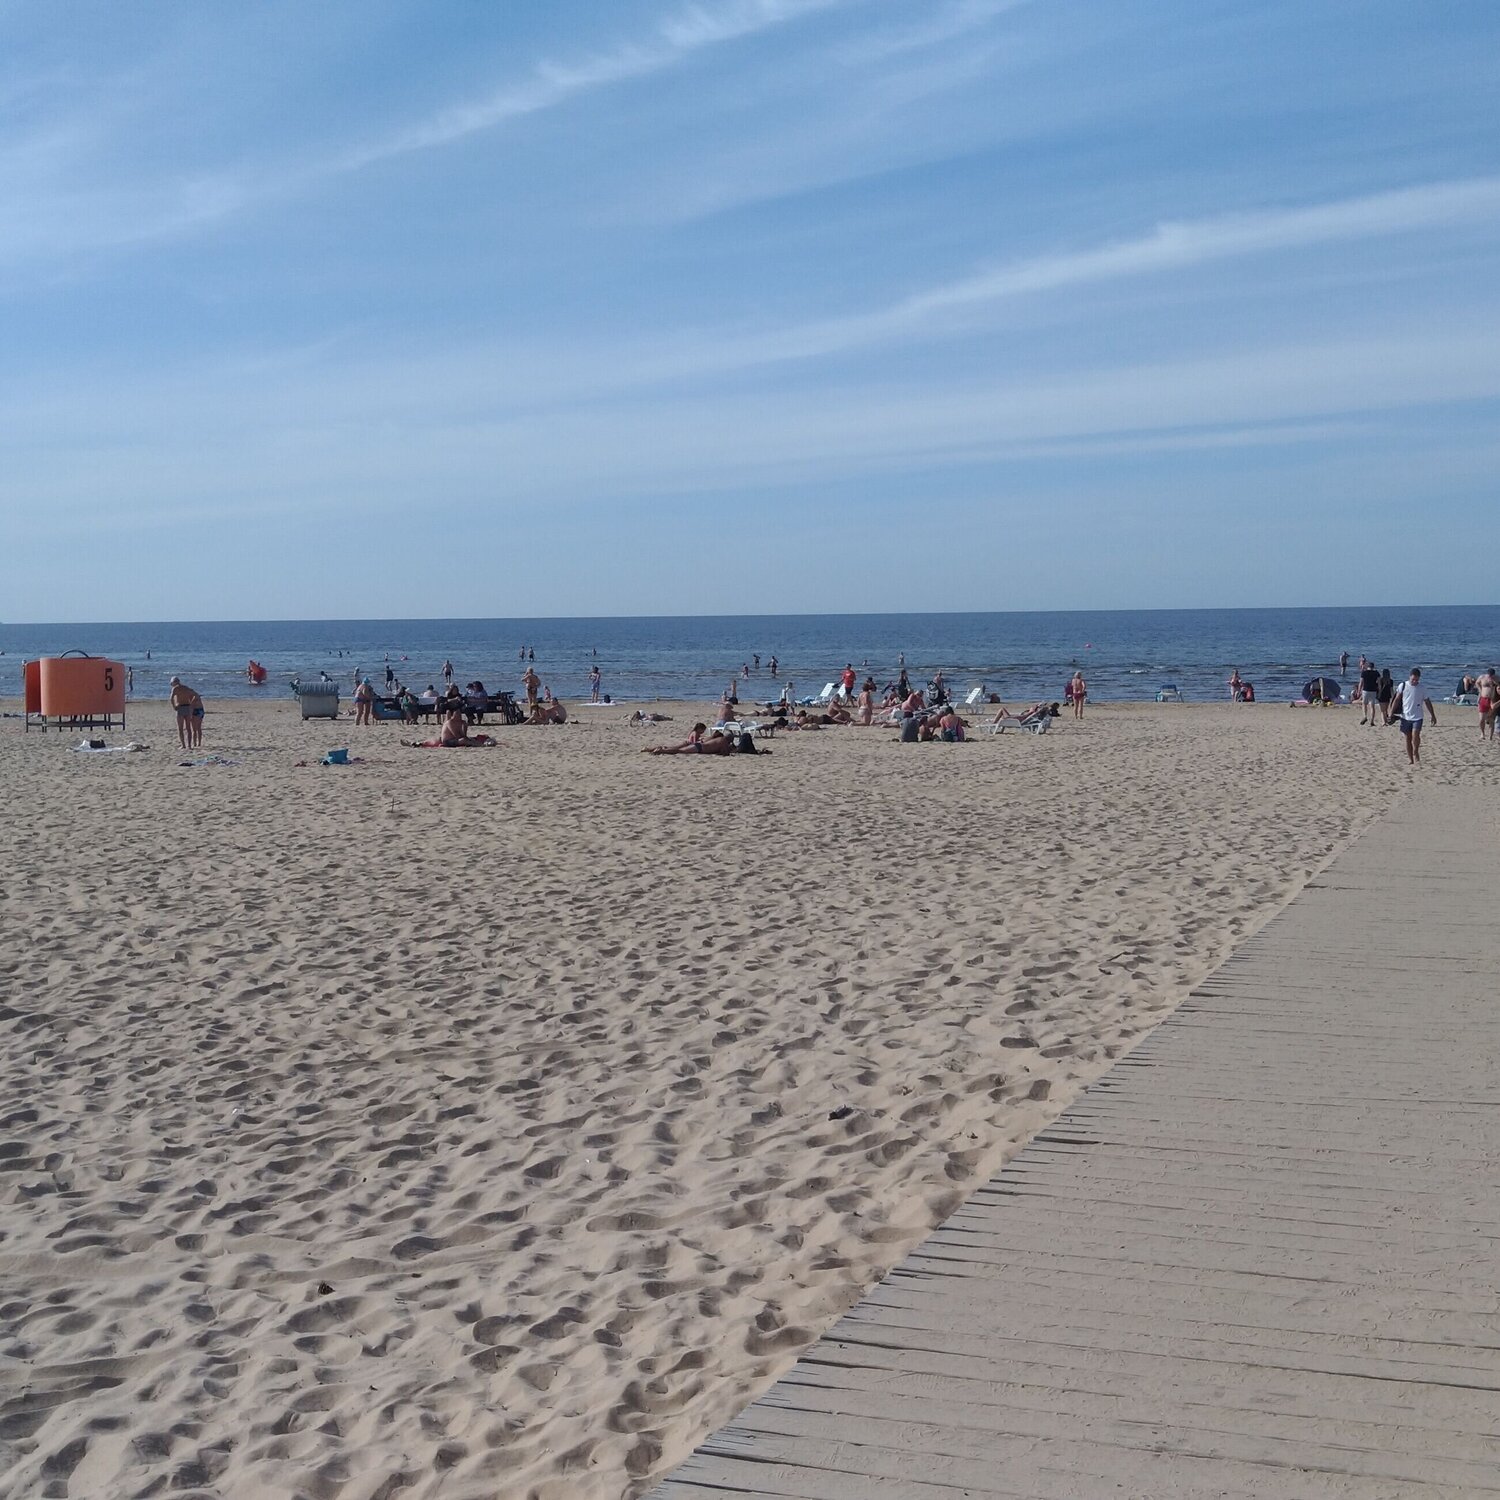 From Riga to the sea: eight best beaches easily accessible by public transportation